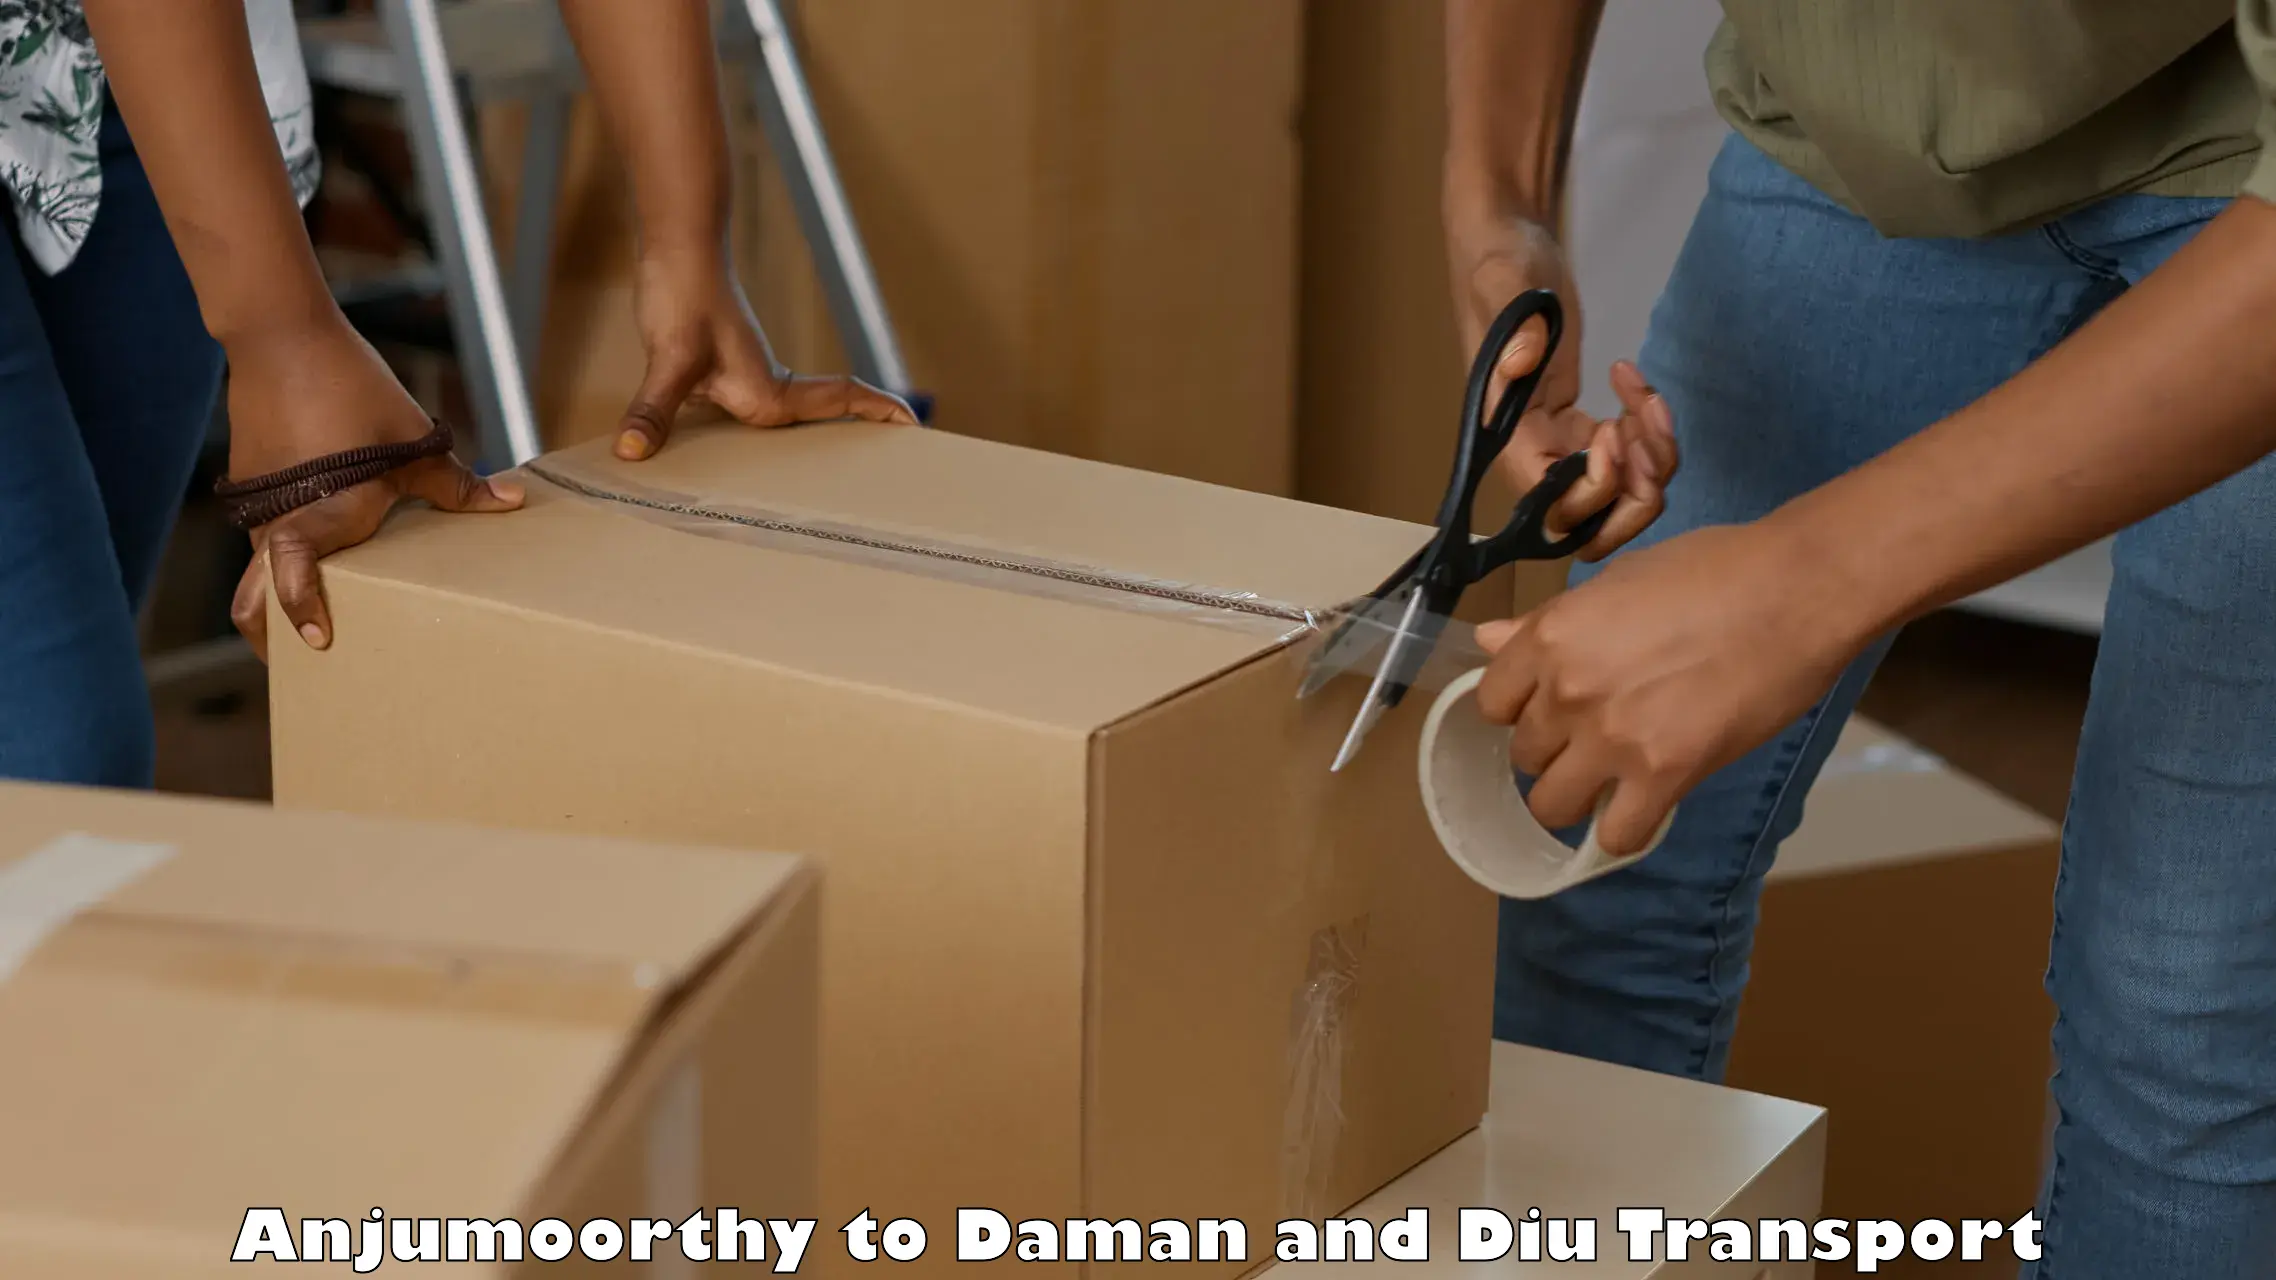 Goods delivery service in Anjumoorthy to Daman